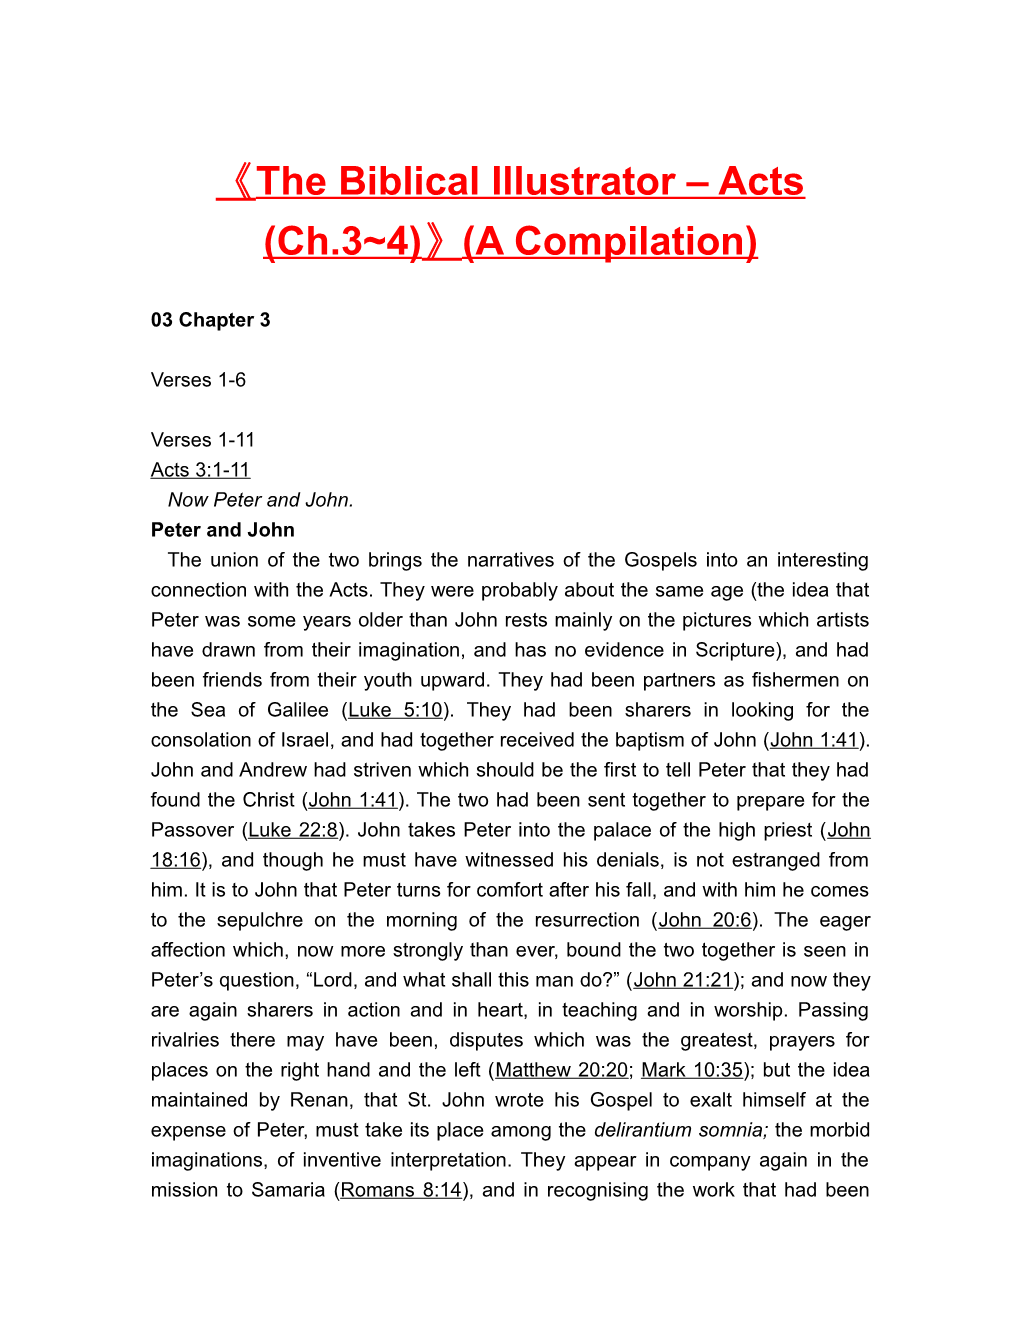 The Biblical Illustrator Acts (Ch.3 4) (A Compilation)